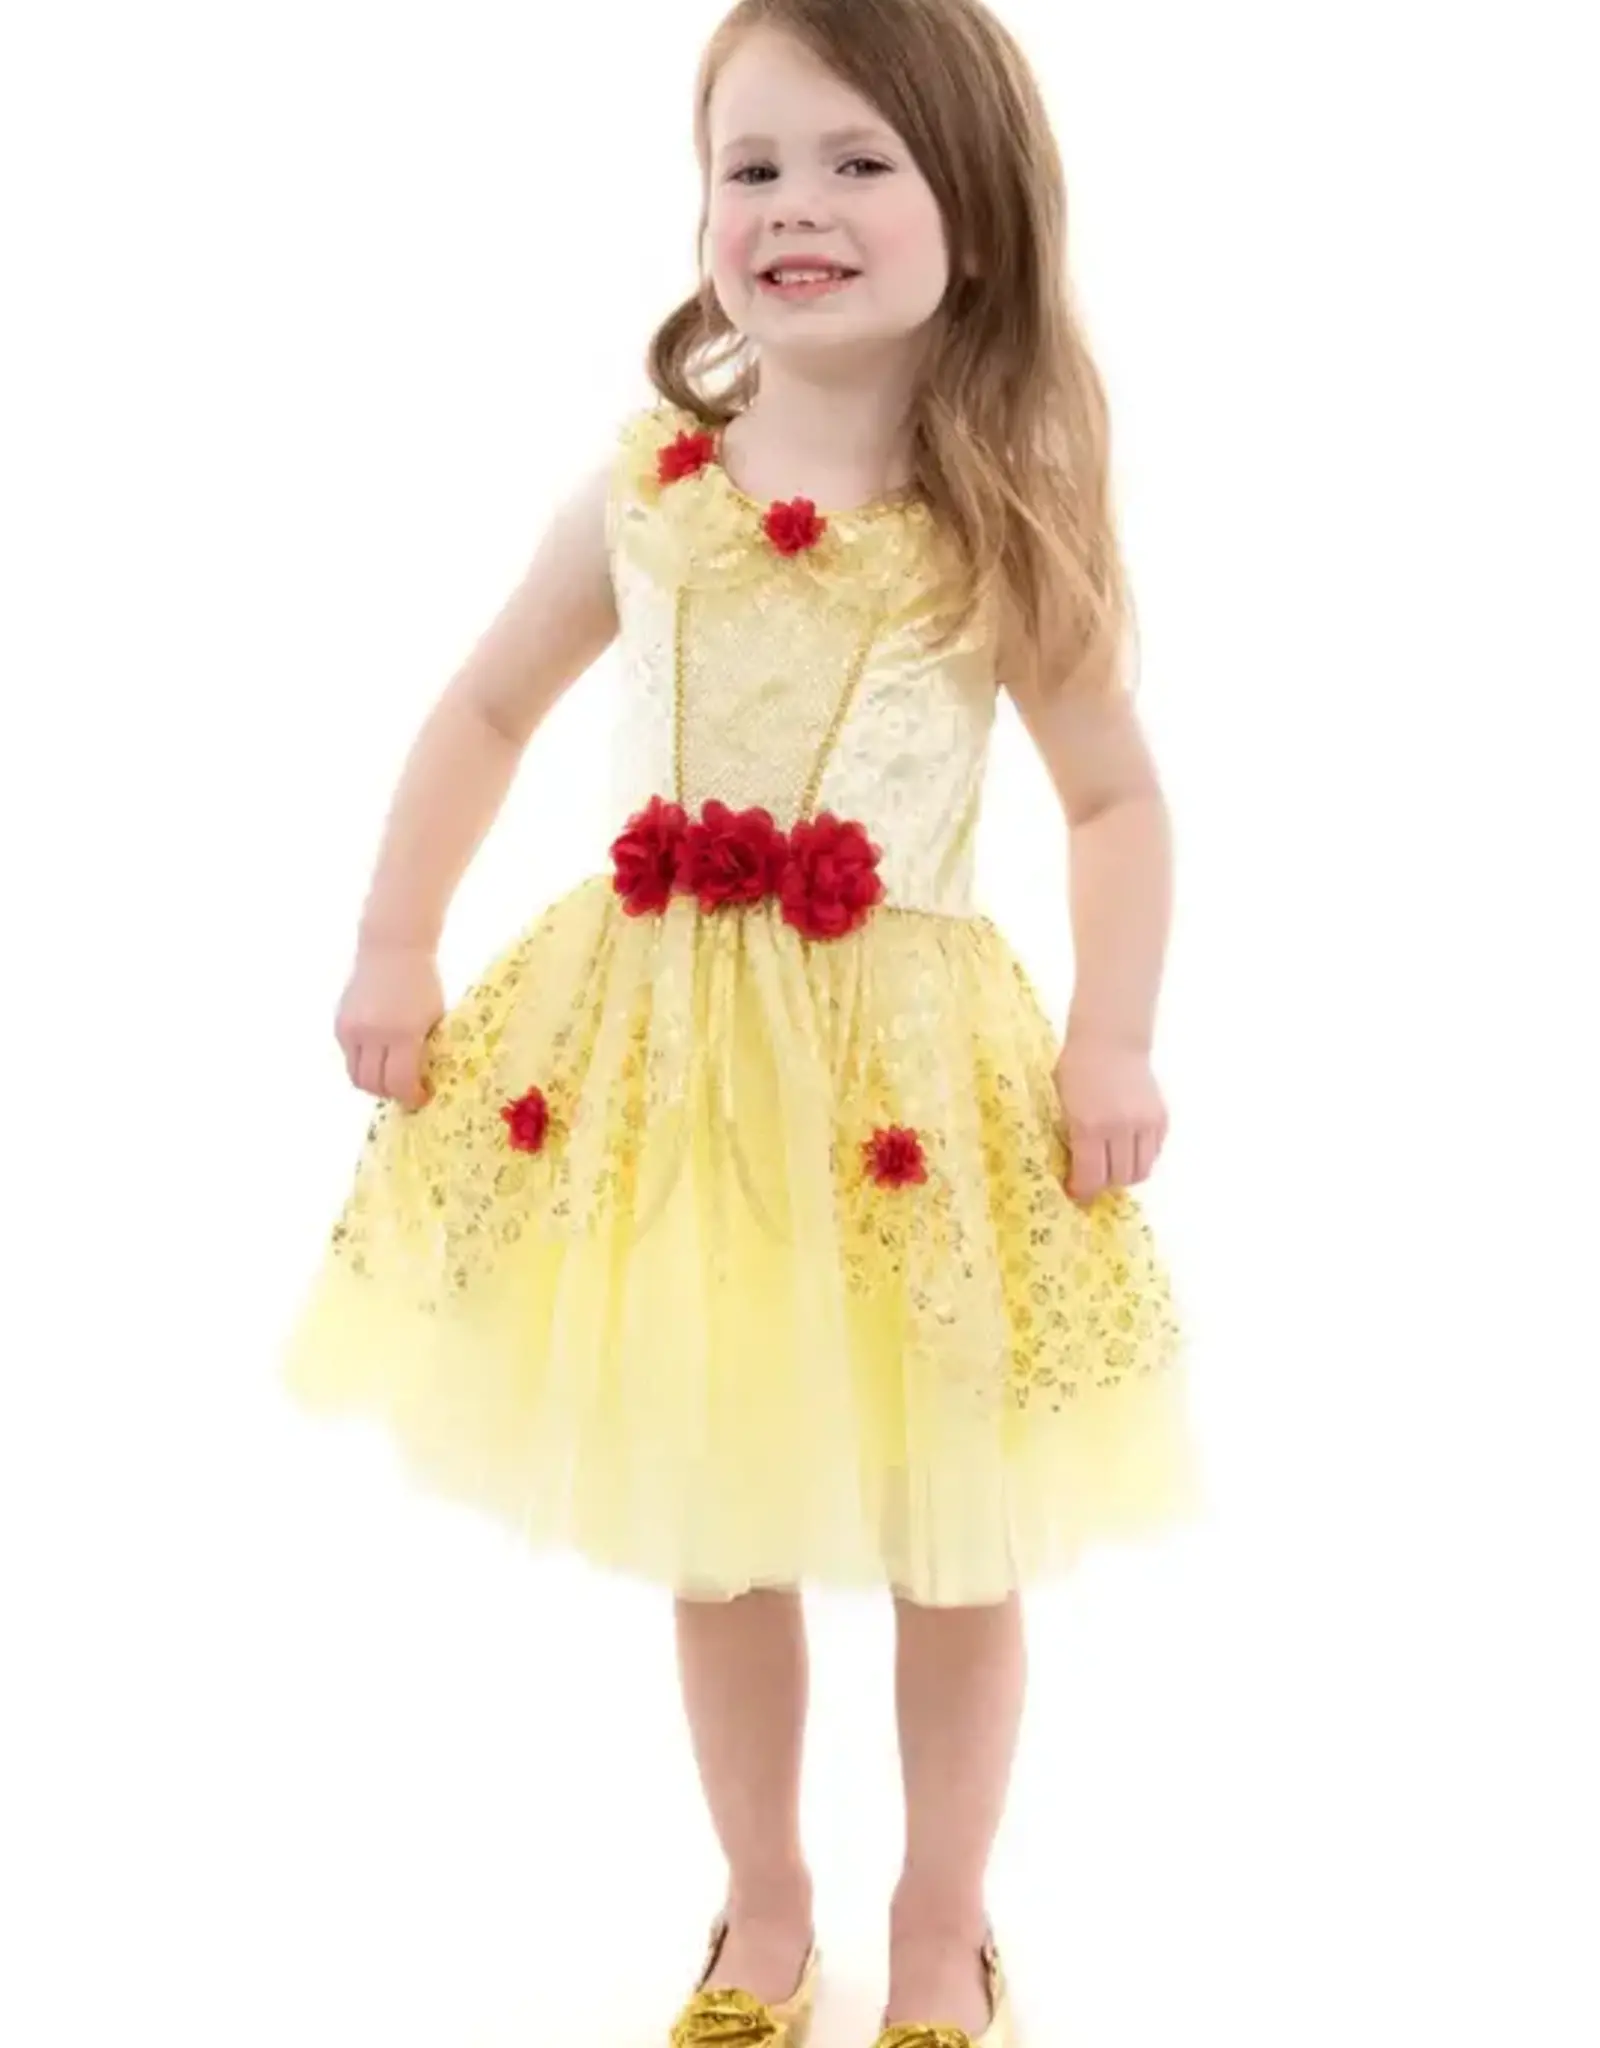 Little Adventures *NEW* Yellow Beauty Party Dress 5-7 YRS (L